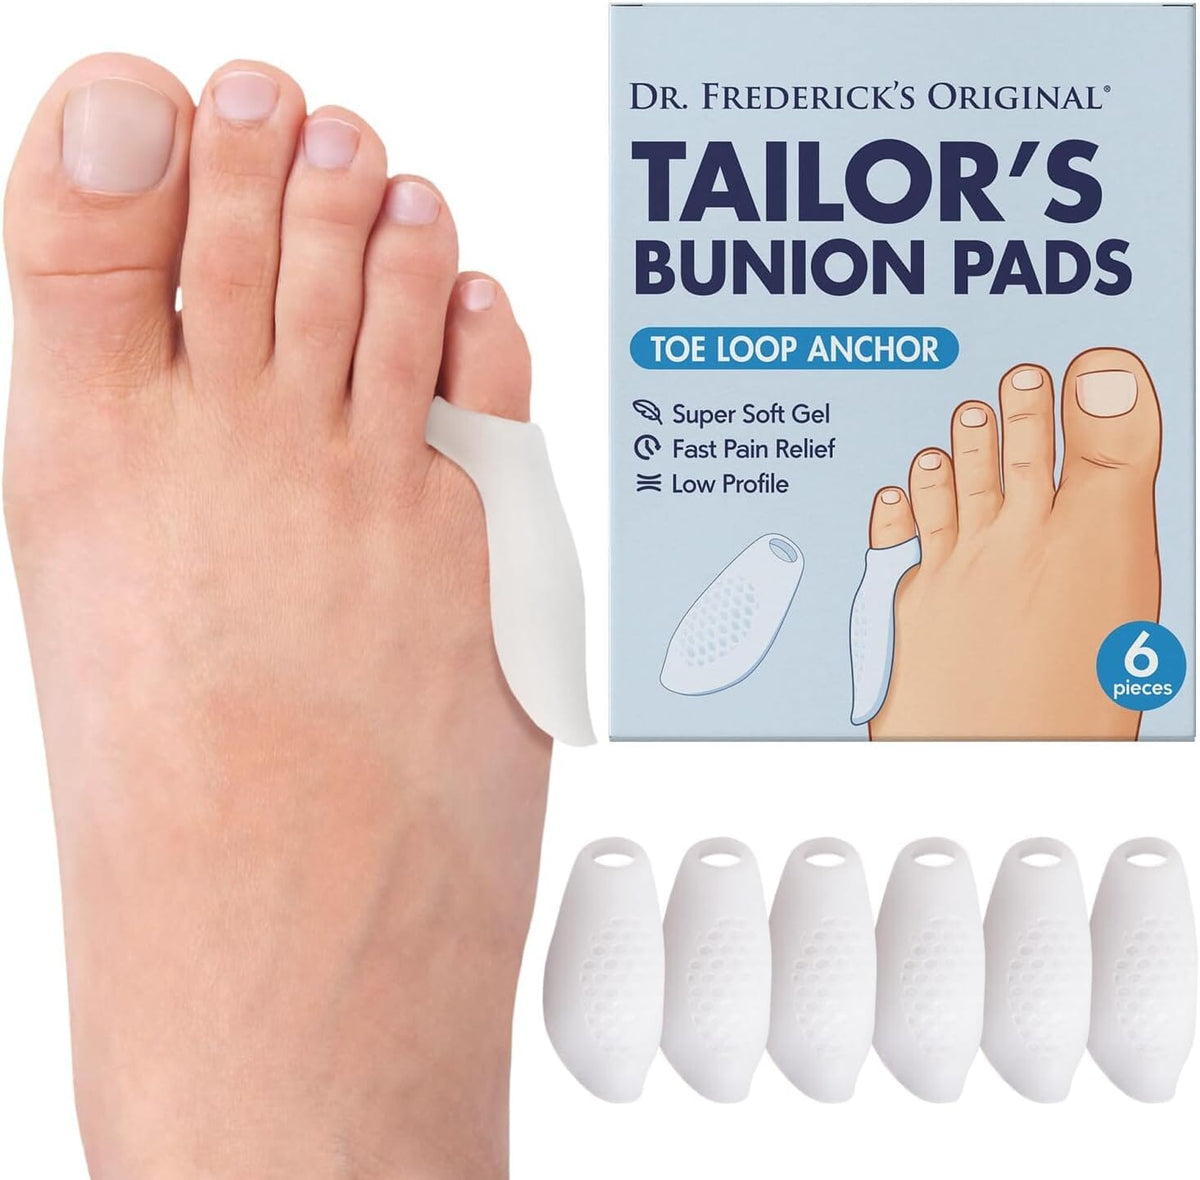 Dr. Frederick&#39;s Original Tailor&#39;s Bunion Pads - Soft Gel Bunionette Cushions - Tailors Bunion Corrector for Pain Relief - Fits Men &amp; Women - Pinky Toe Protector - 6 Pads Foot Pain Dr. Frederick&#39;s Original 